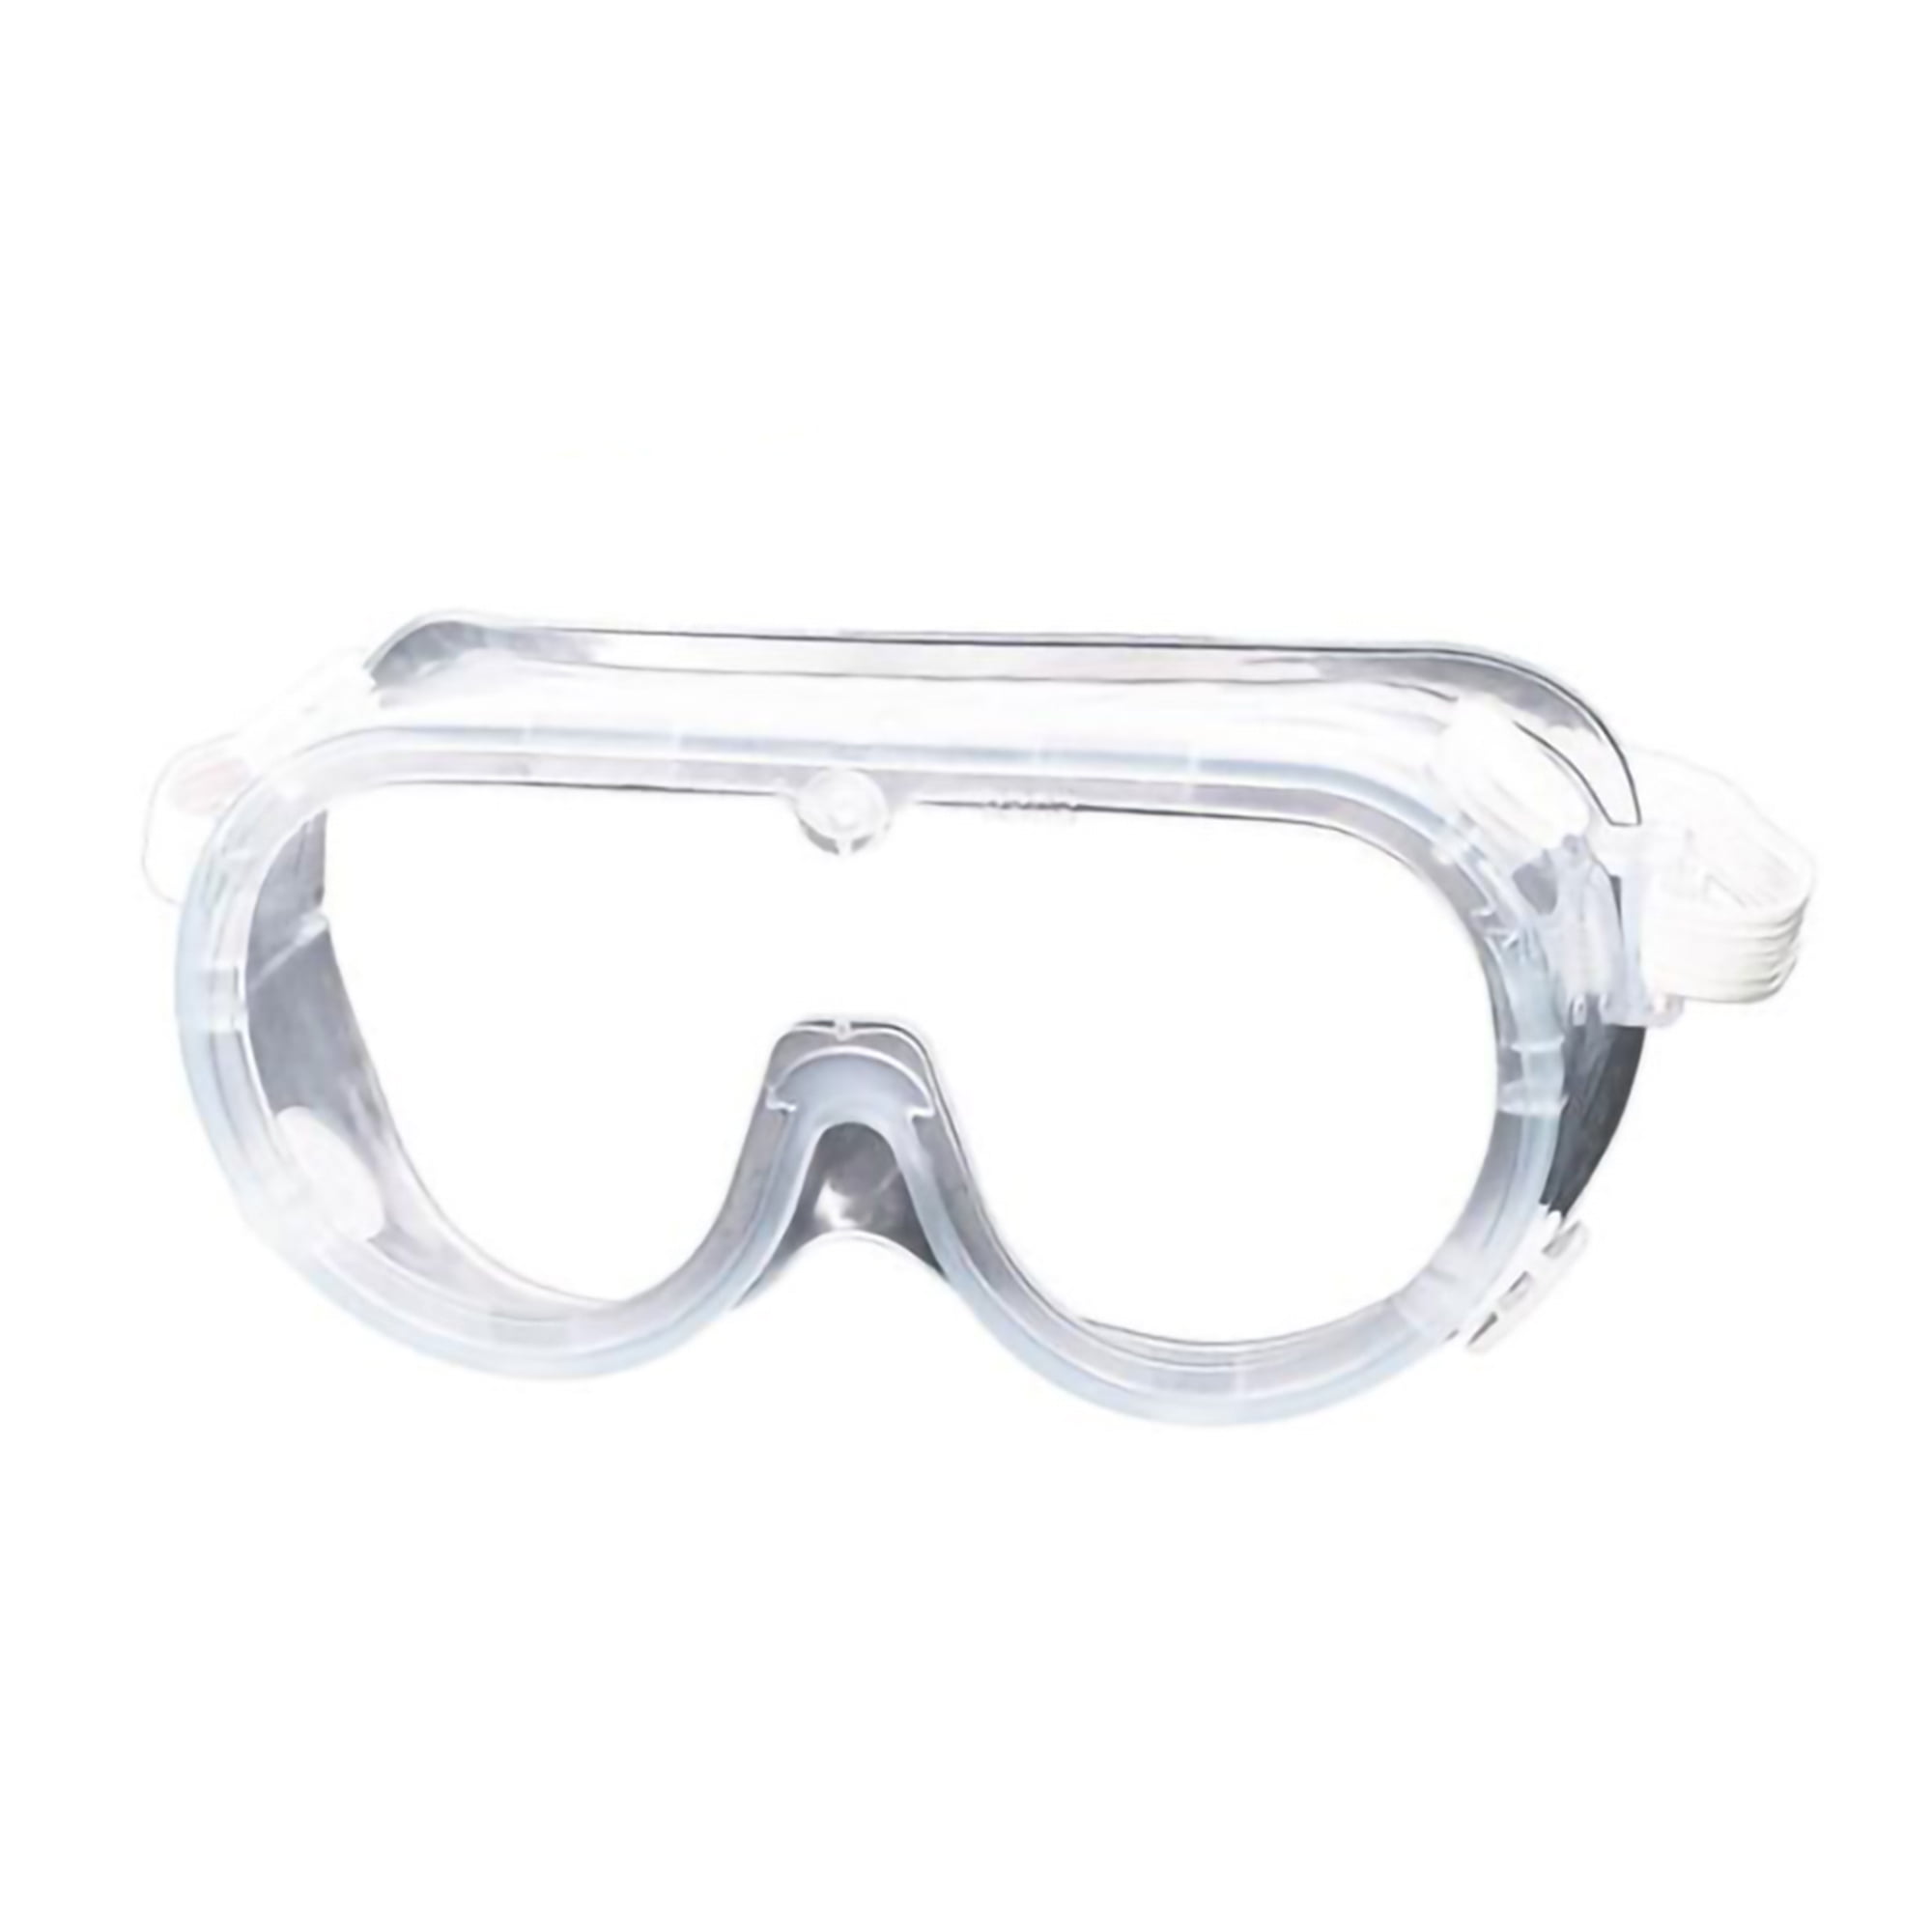 Factory Lab Outdoor Work Safety Glasses Clear Anti-impact Eye Protective Glasses 